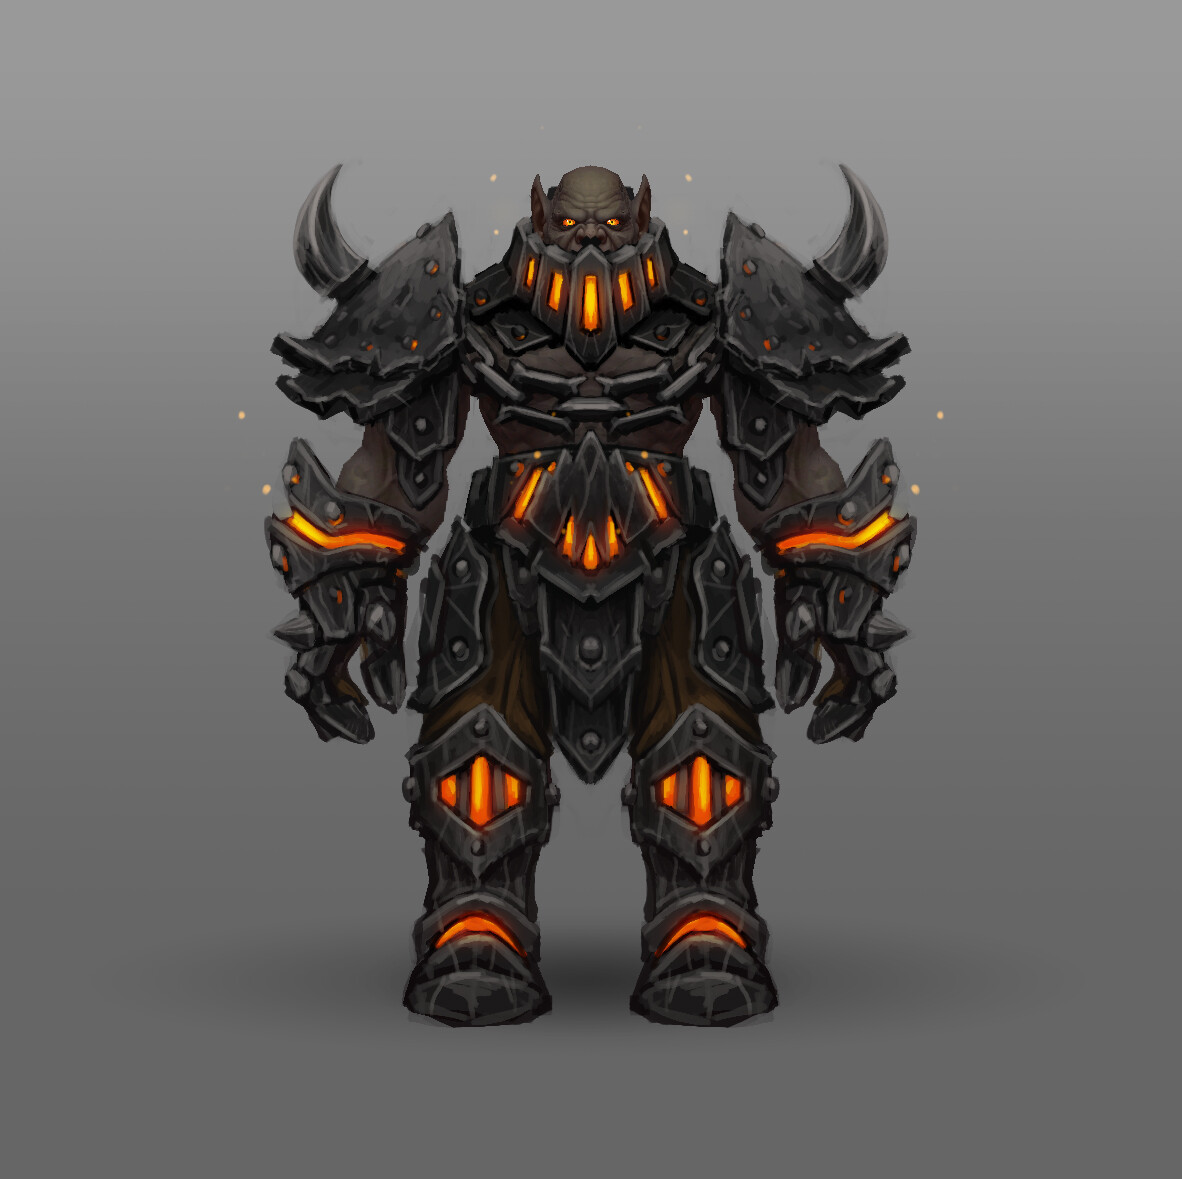 Warrior

This set is based on the Blackrock Clan while taking aspects from Blackhand's design. While there is already a pretty good Blackrock Set, the newest tech allows new possibilities with  3d elements for the gloves and boots.